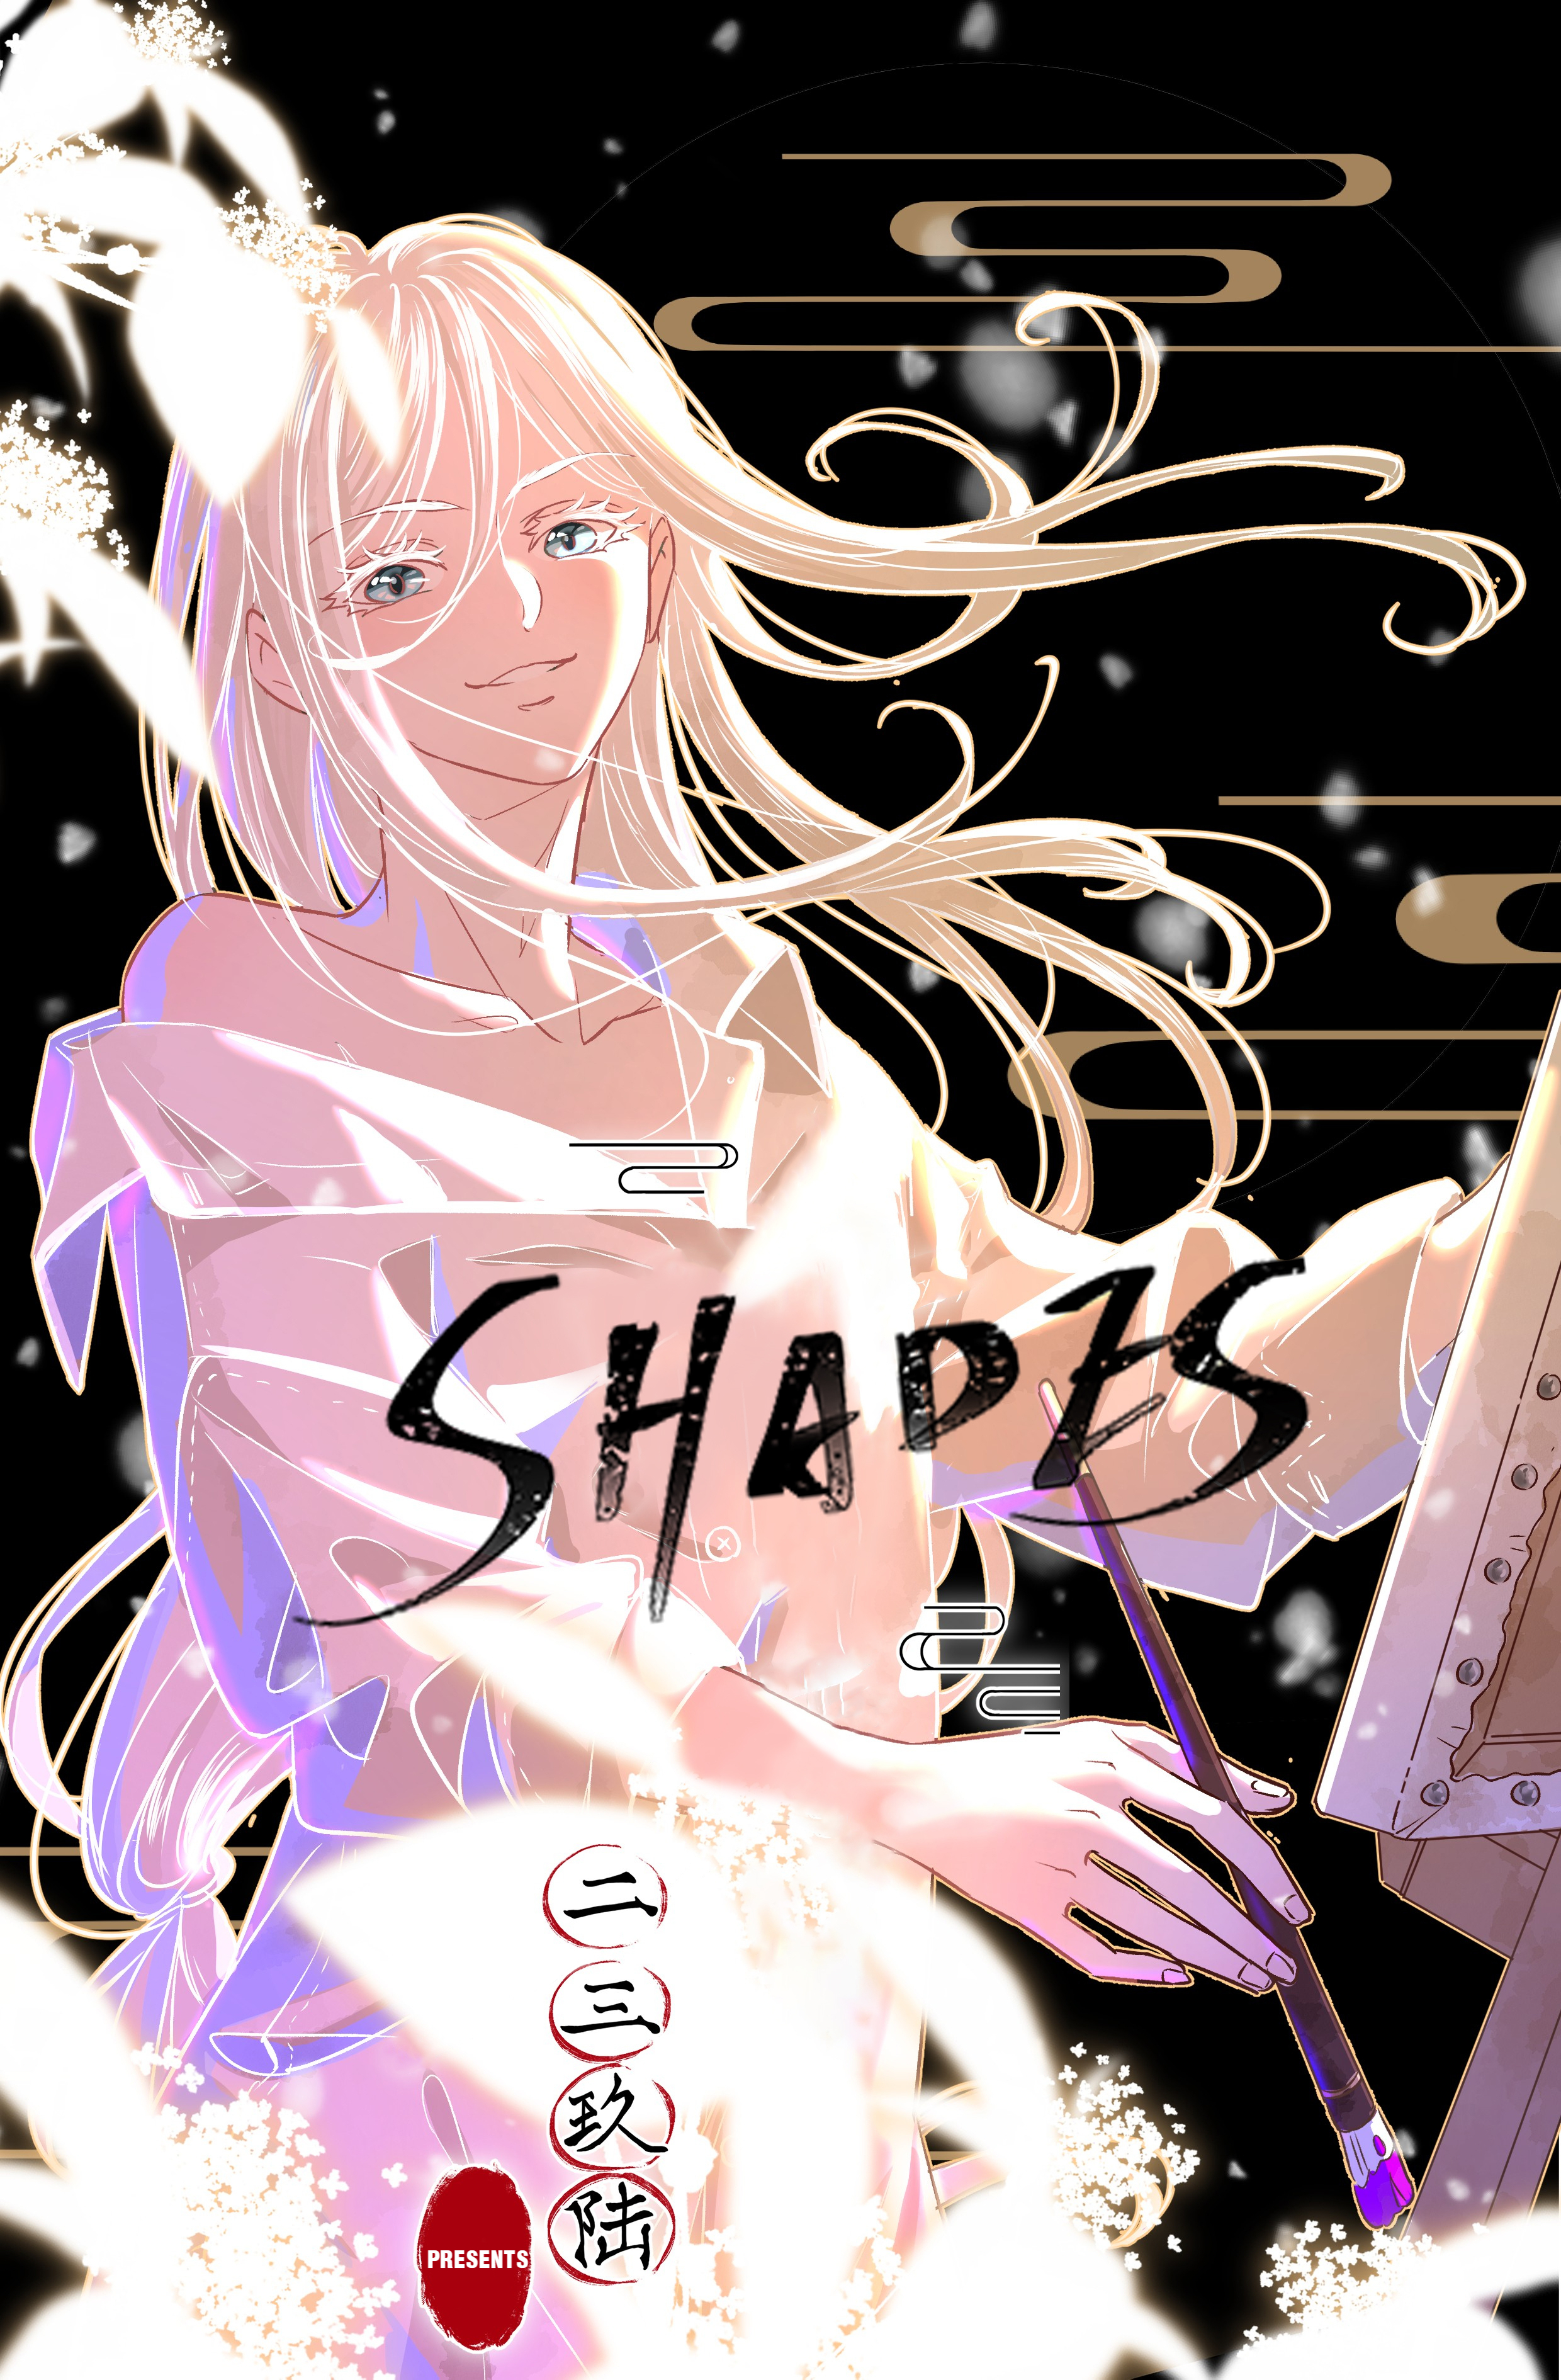 Shades - chapter 37.1 - #1